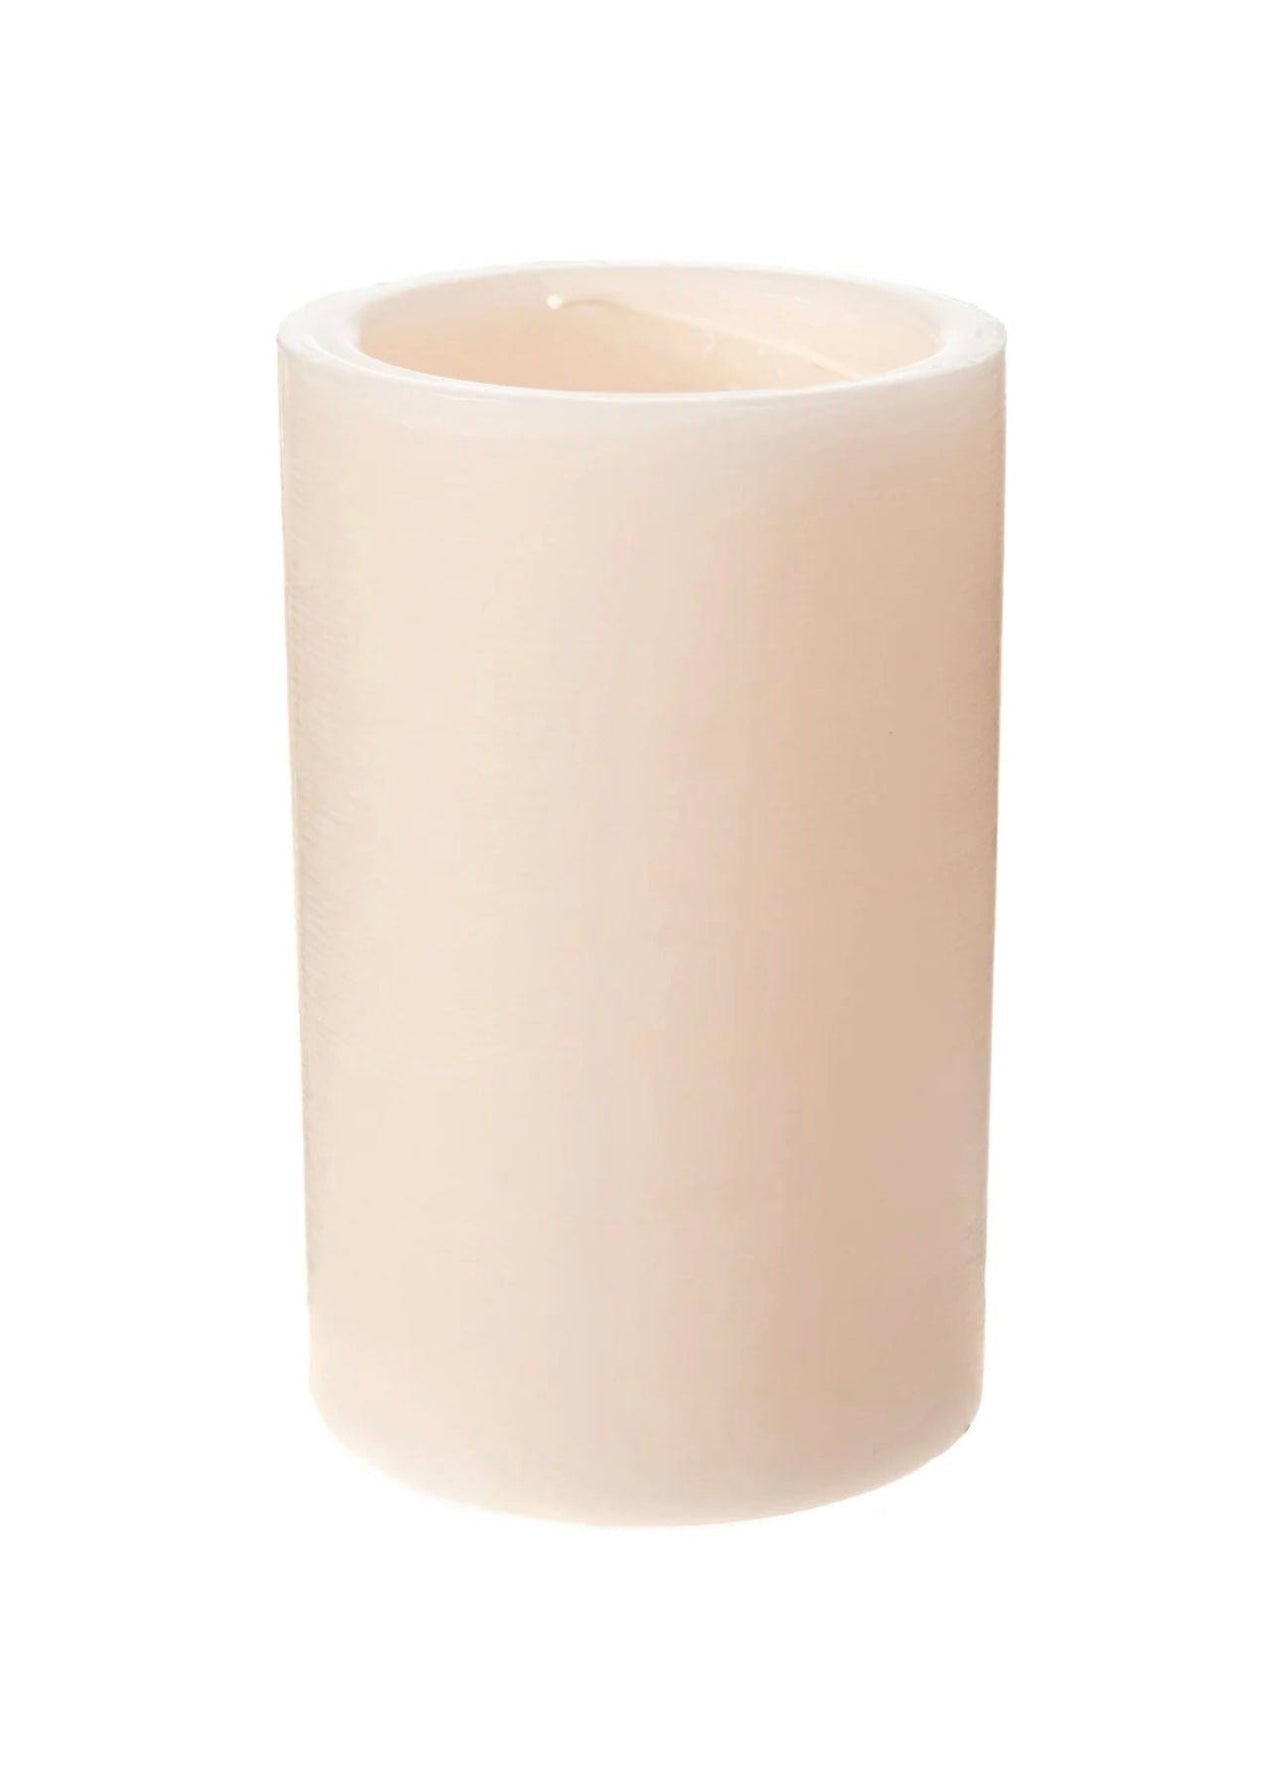 Spiral Light Candles burn AROUND the Candle's Edge! Spiral Light Candle Large 4"w x 6"h / Vanilla+Tobacco